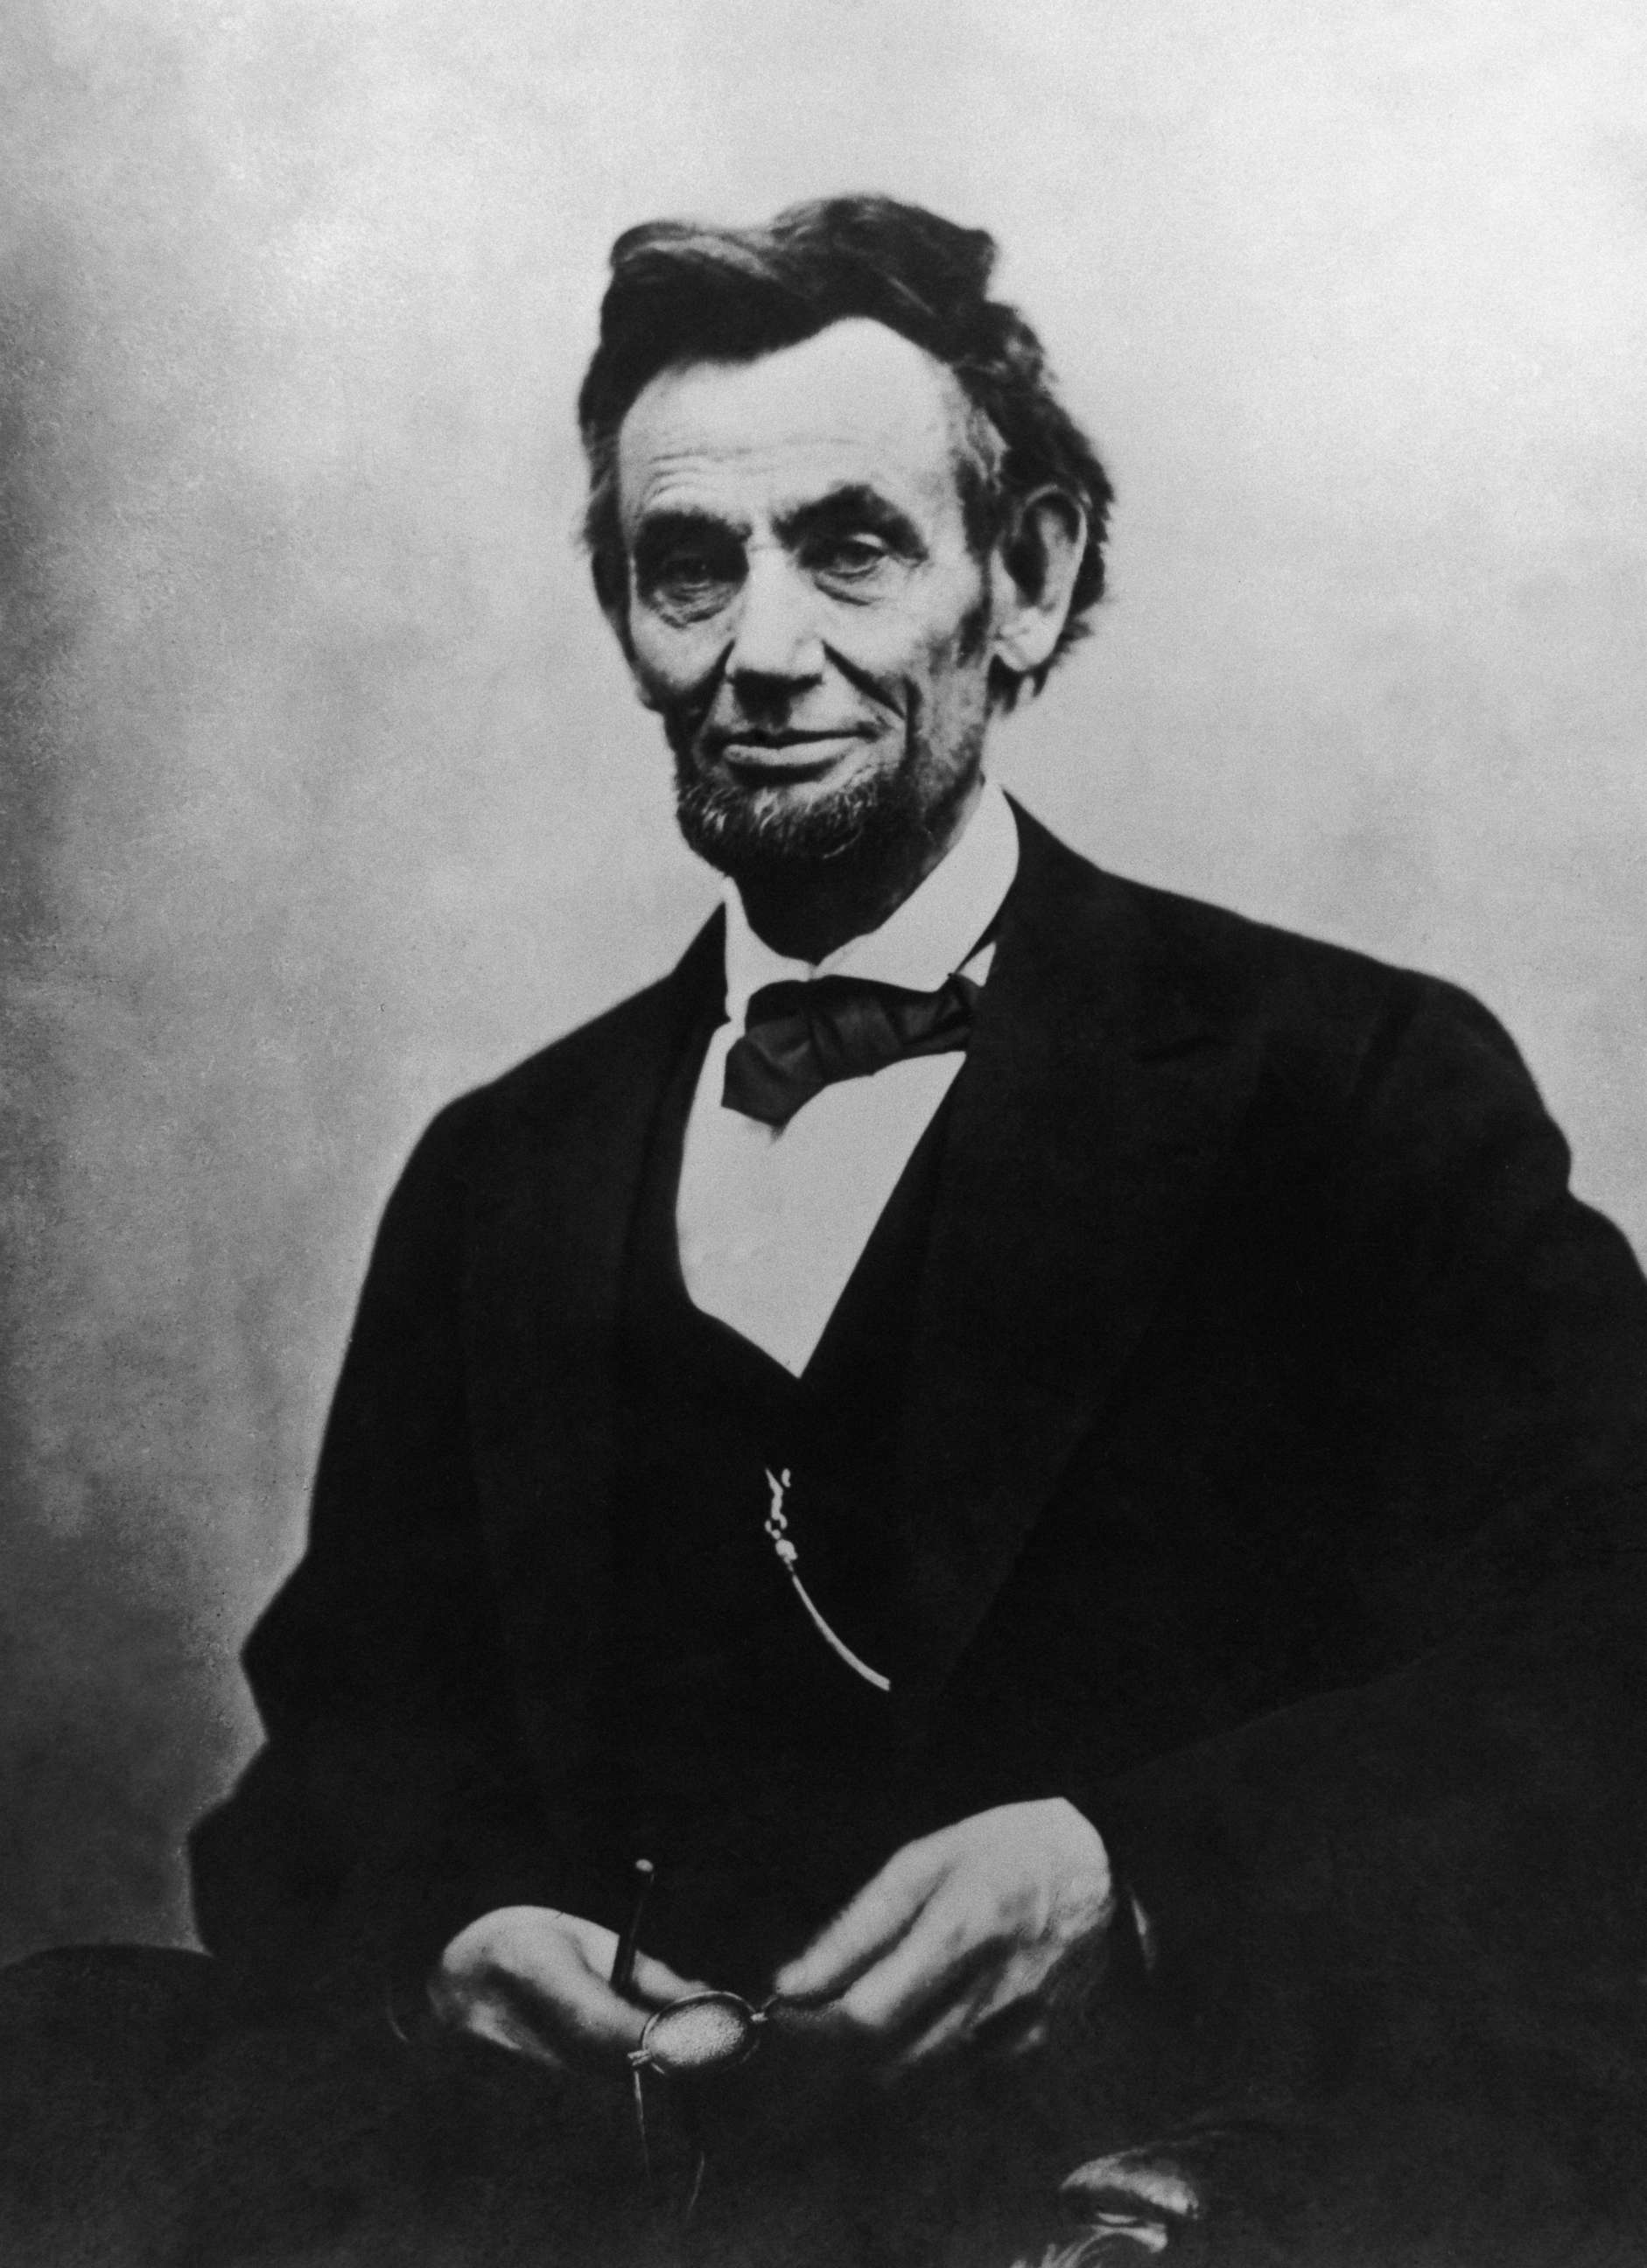 PHOTO: Abraham Lincoln (1809 - 1865), the 16th President of the United States of America. 